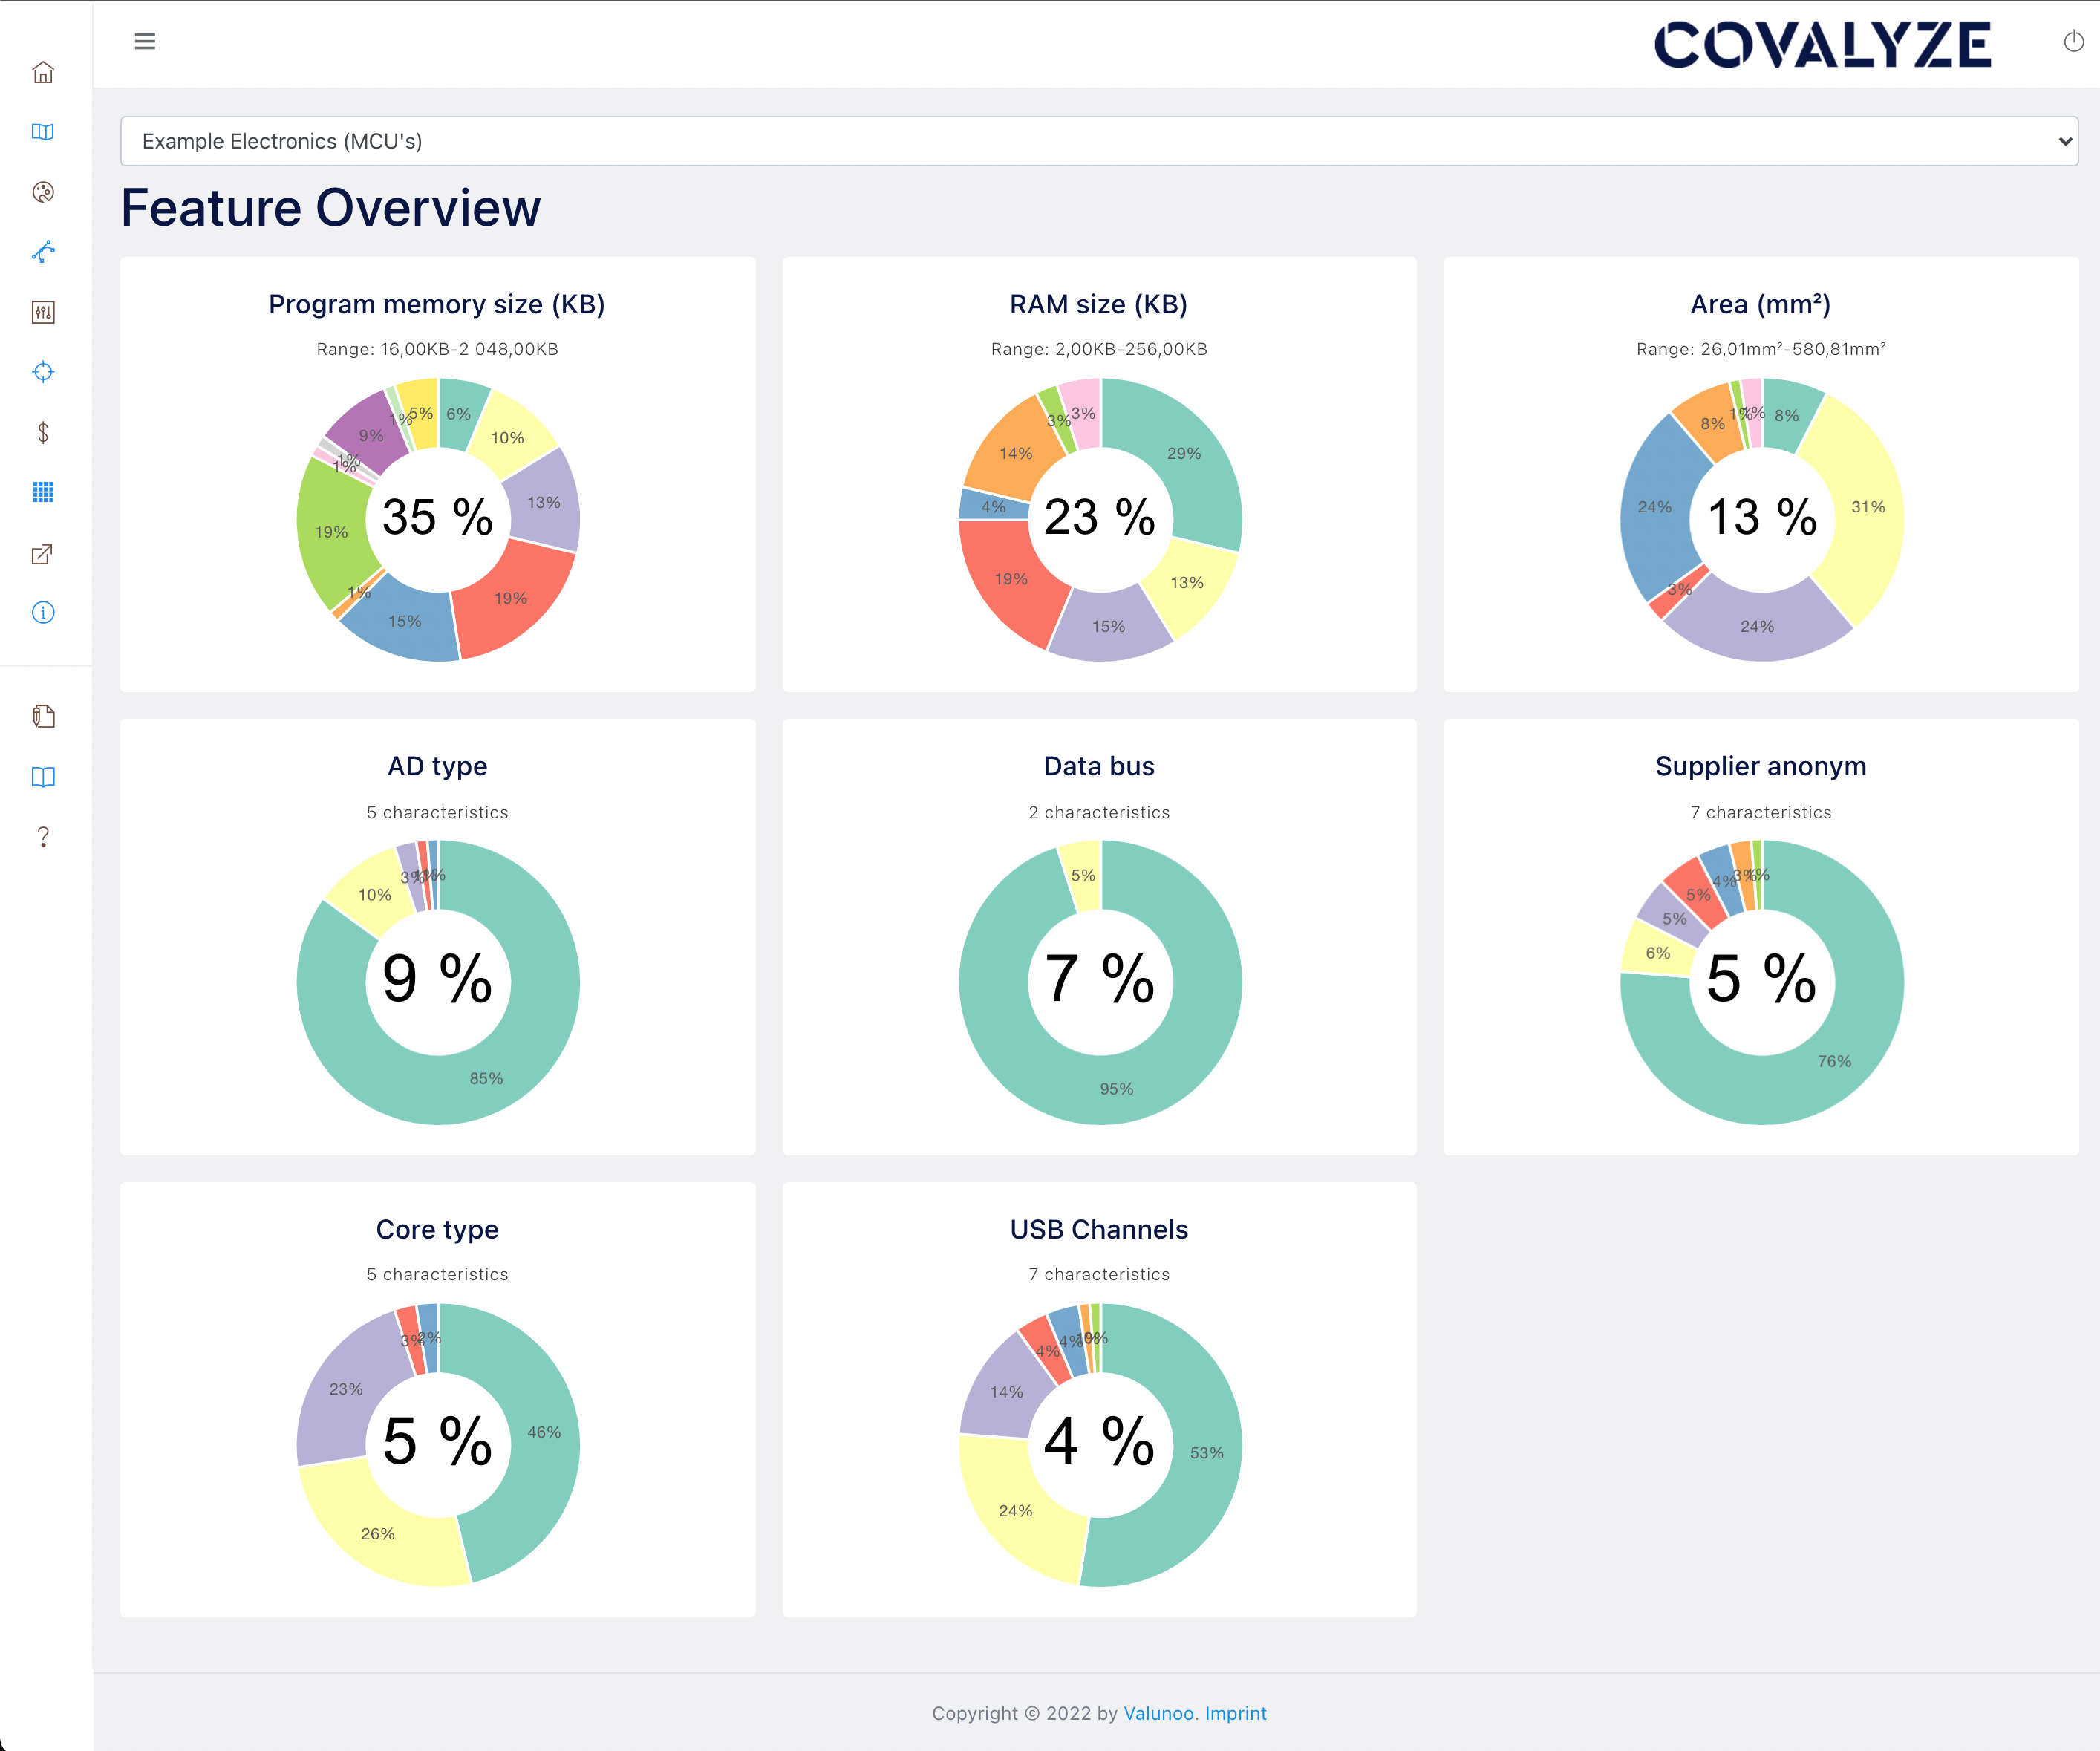 COVALYZE Software - See which features drive the prices of your suppliers in a category